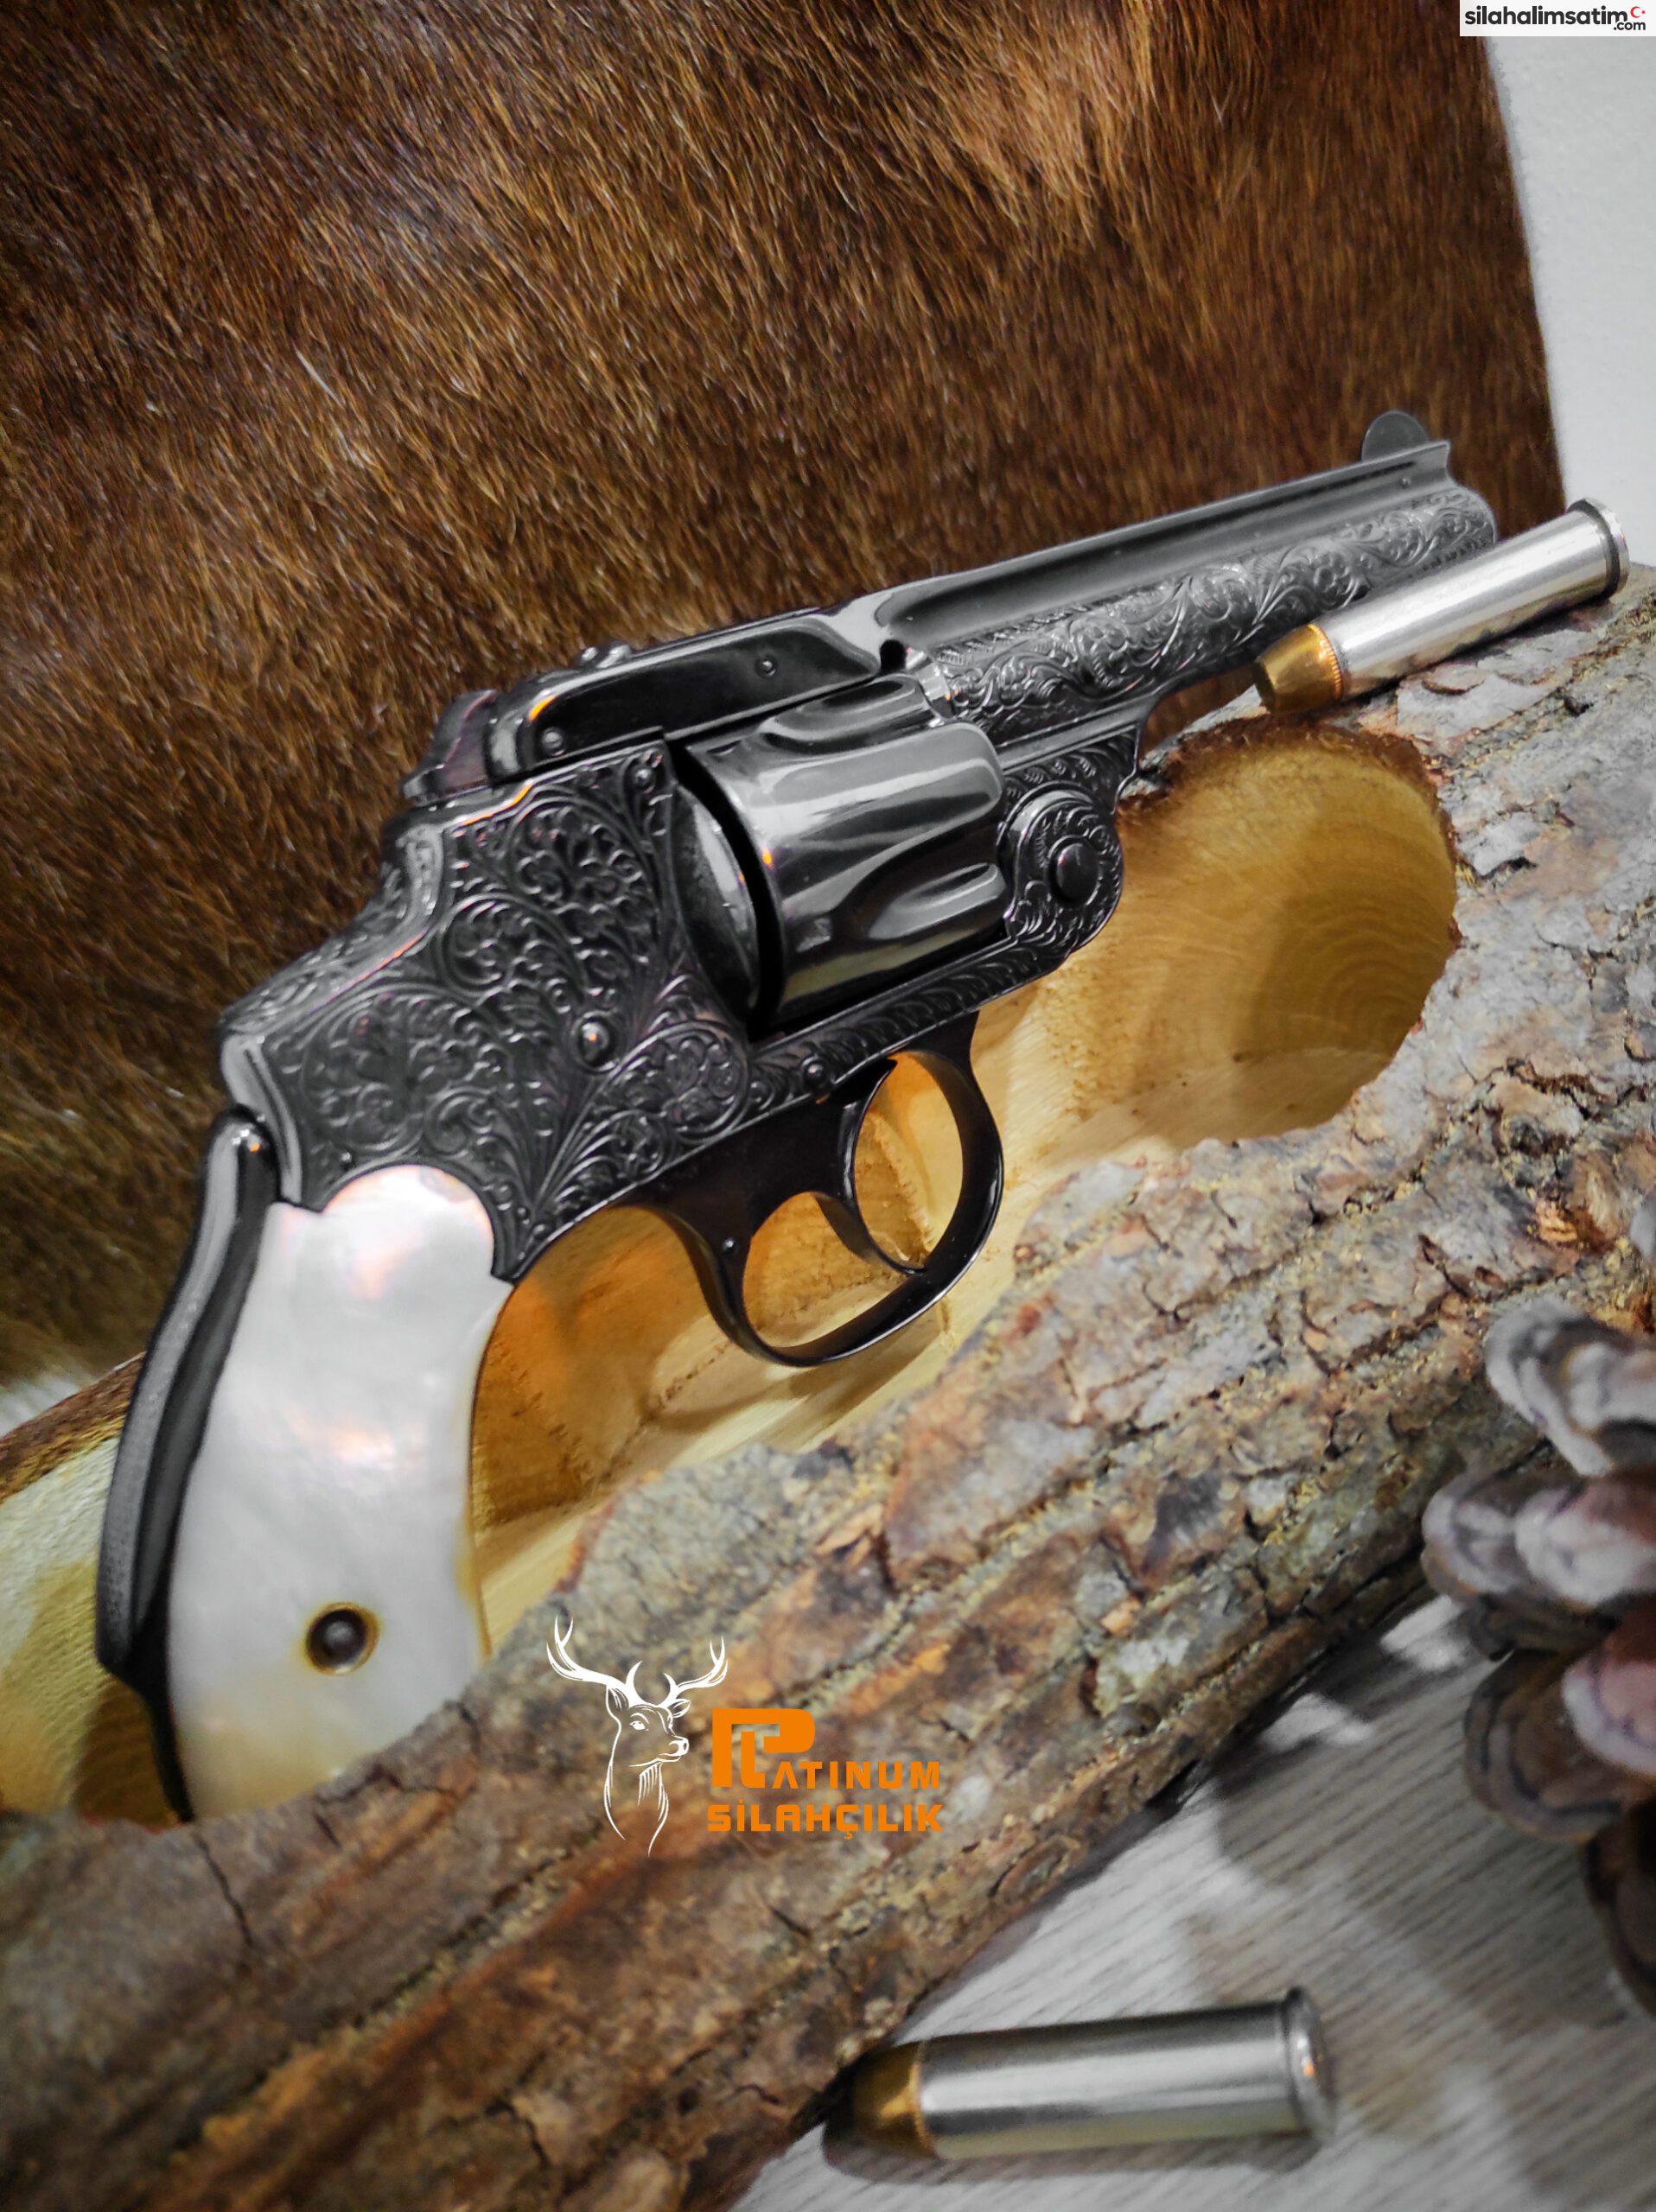 SMİTH WESSON